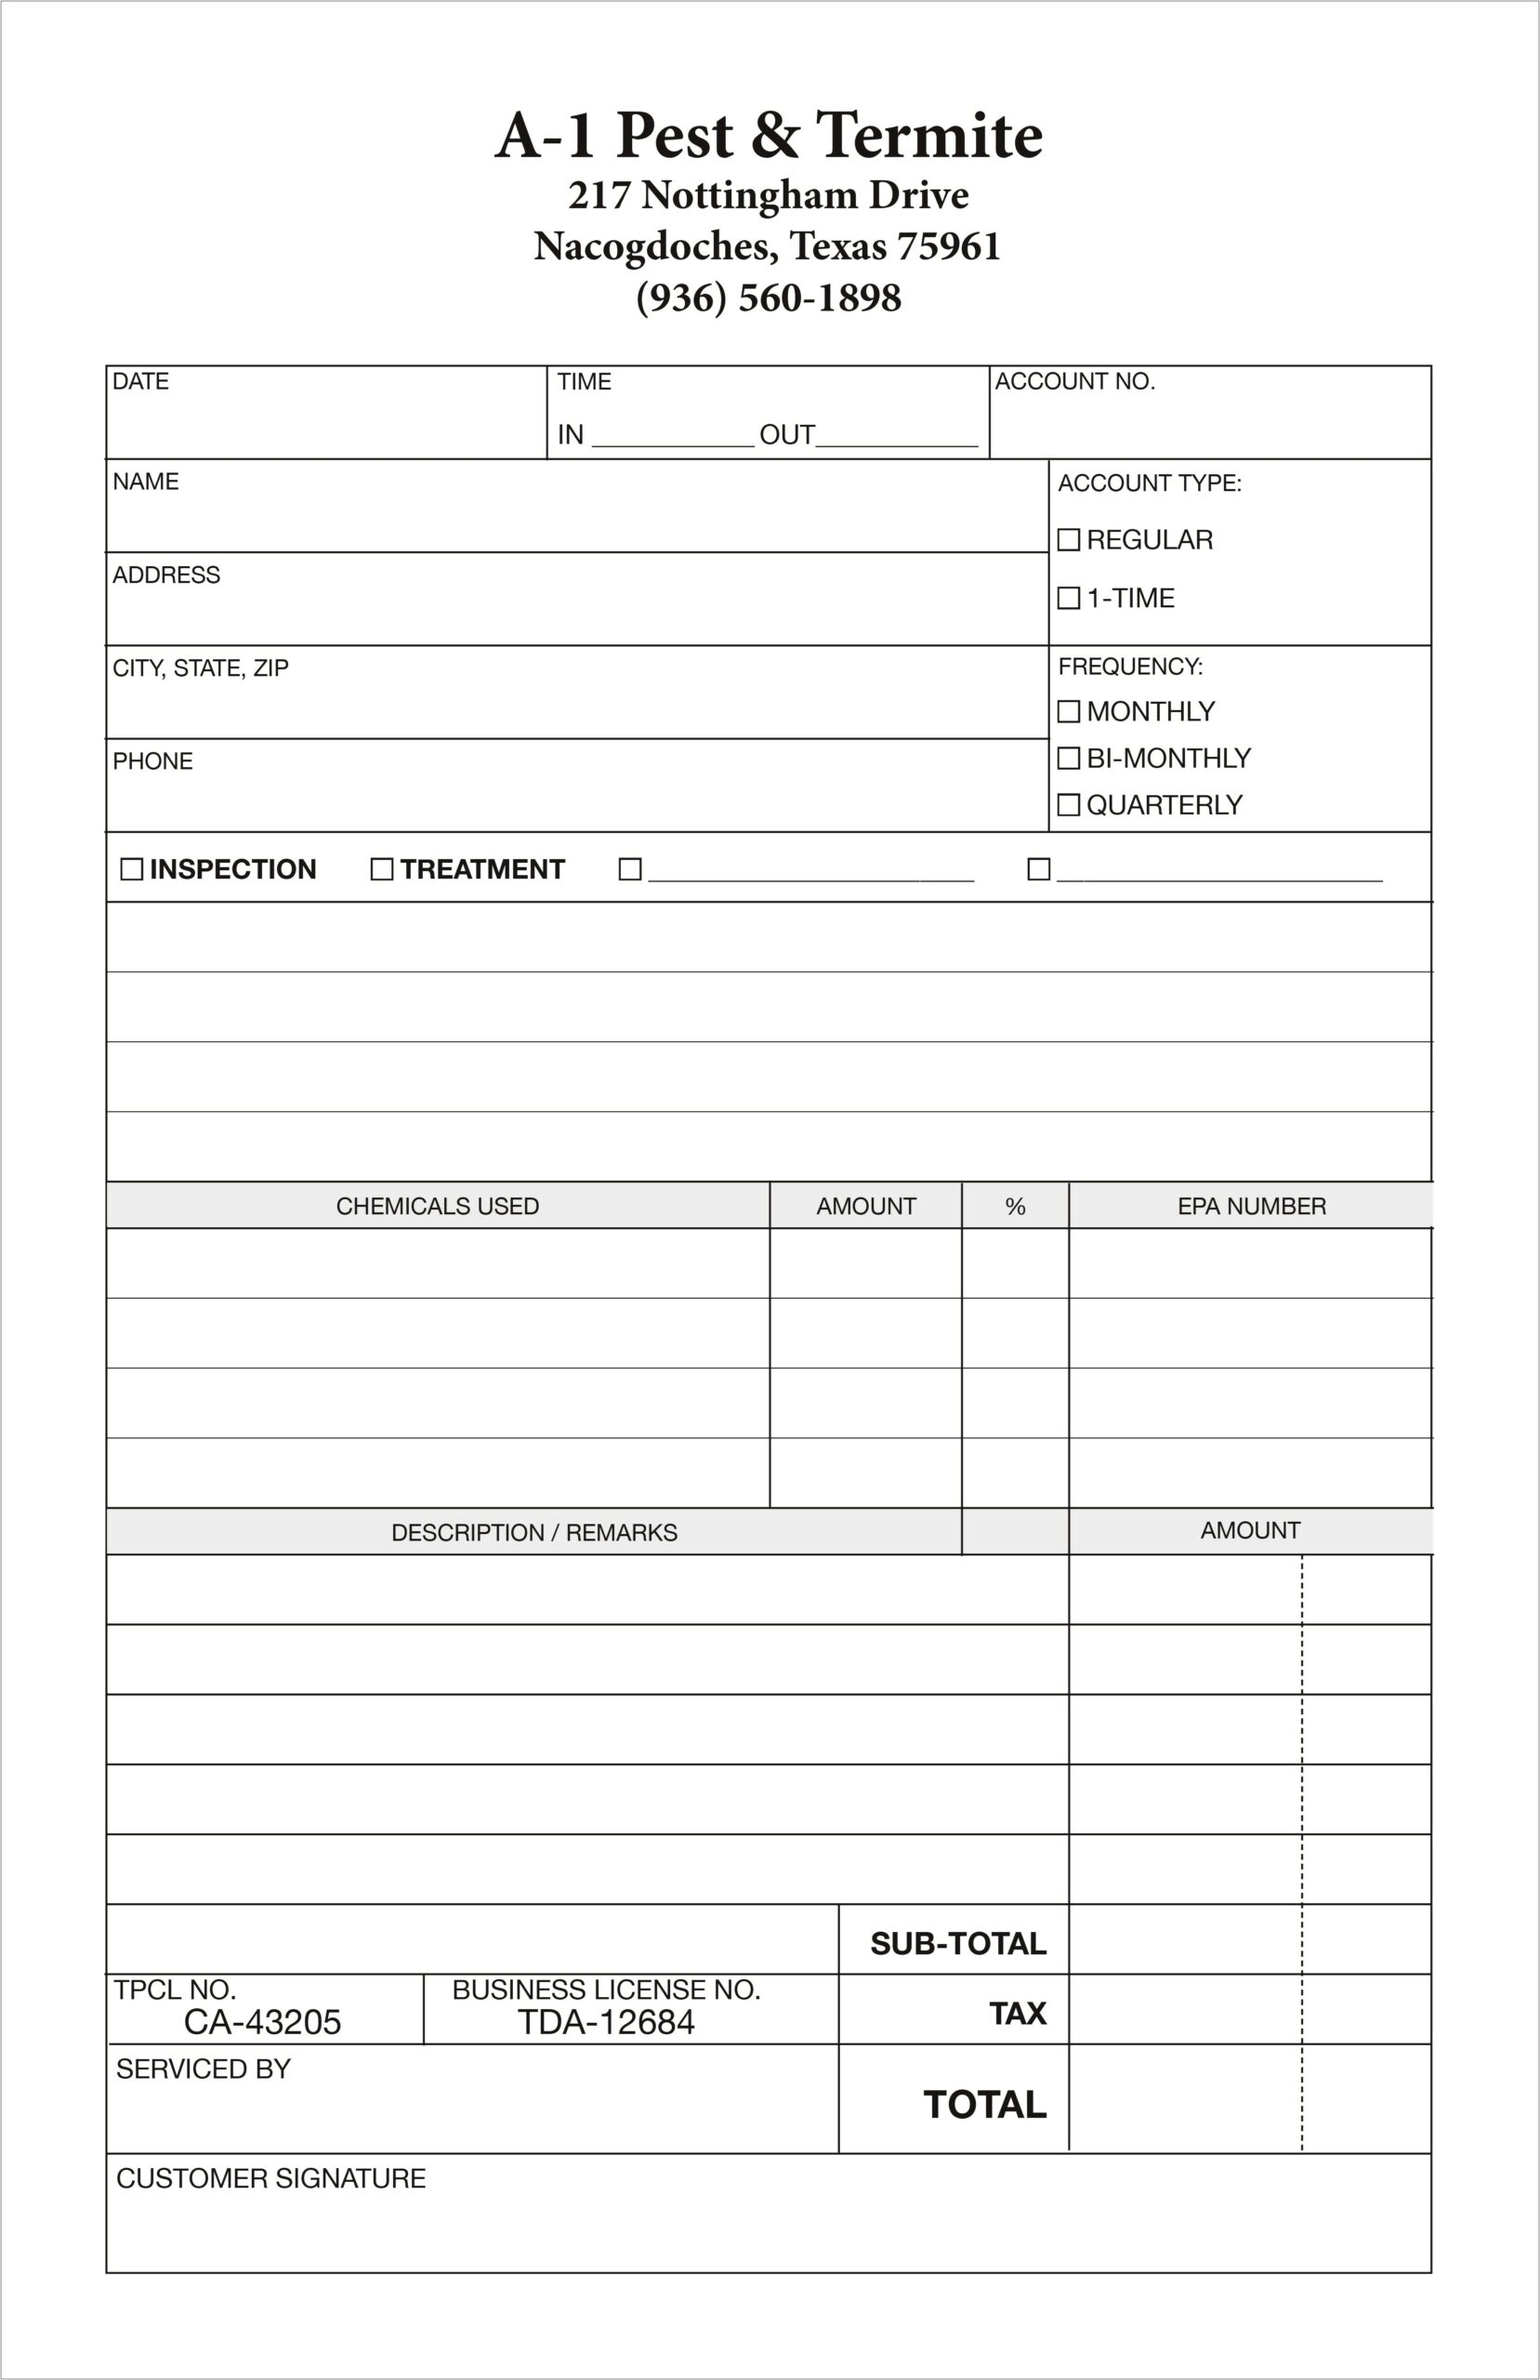 Pest Control Invoice Templates Free Download